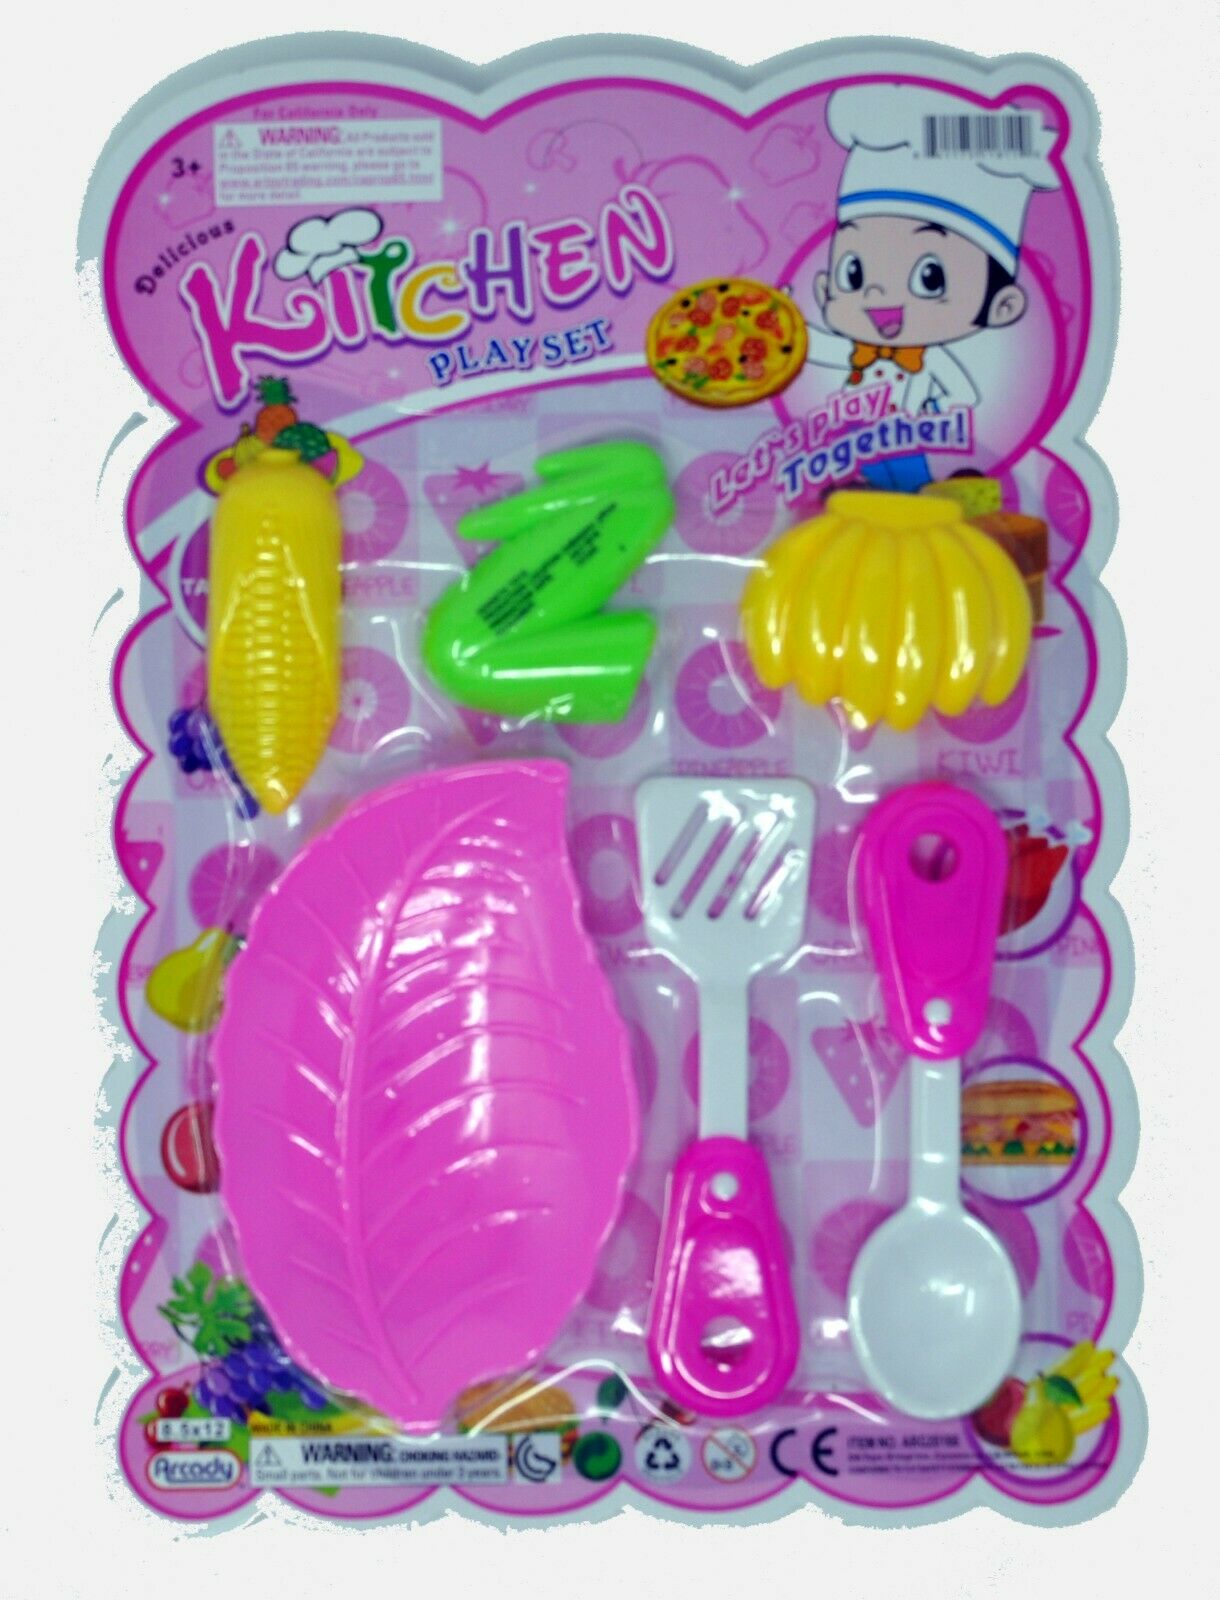 6-pc Kitchen play set with toy fruit and vegetables. Great gift for children